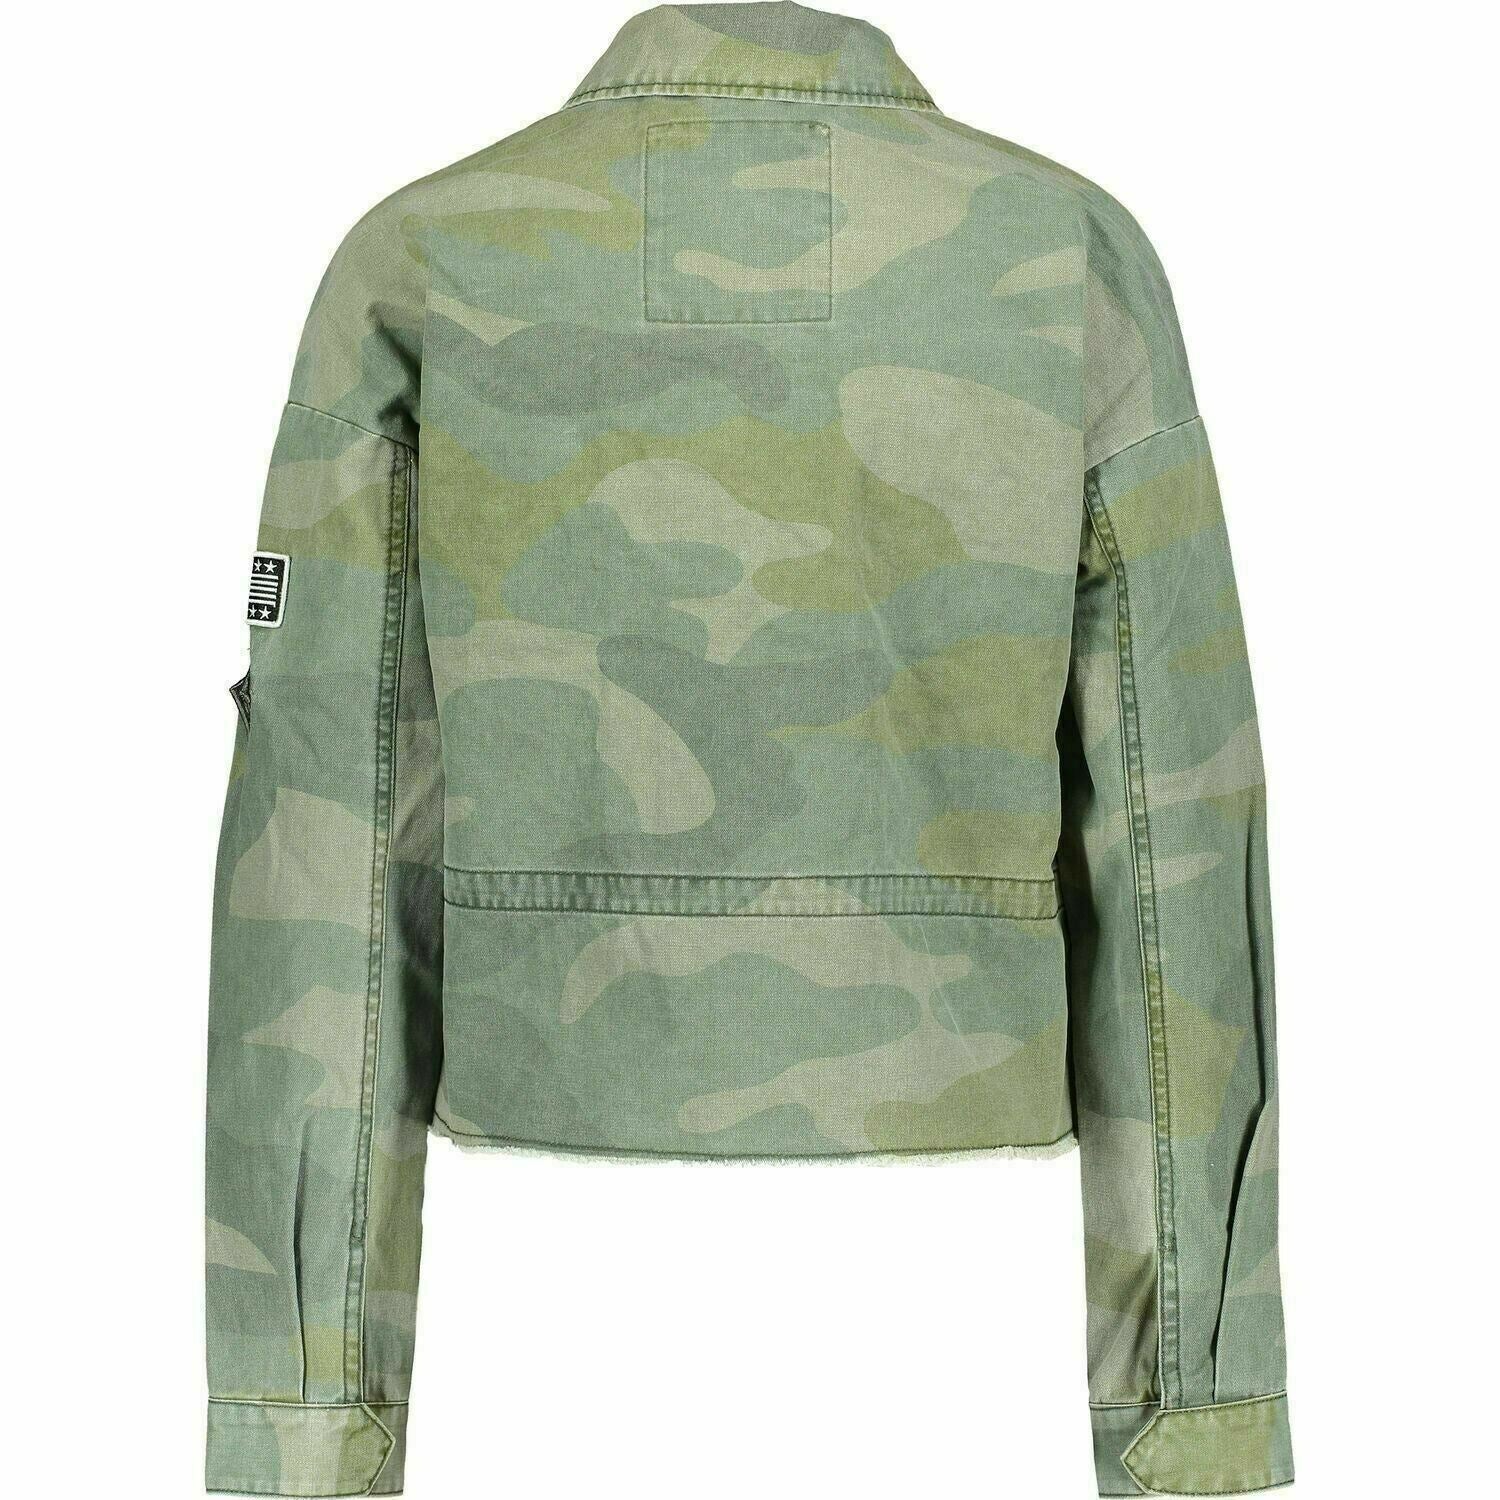 SUPERDRY Women's Crop Utility Jacket, Washed Green Camo, size XS